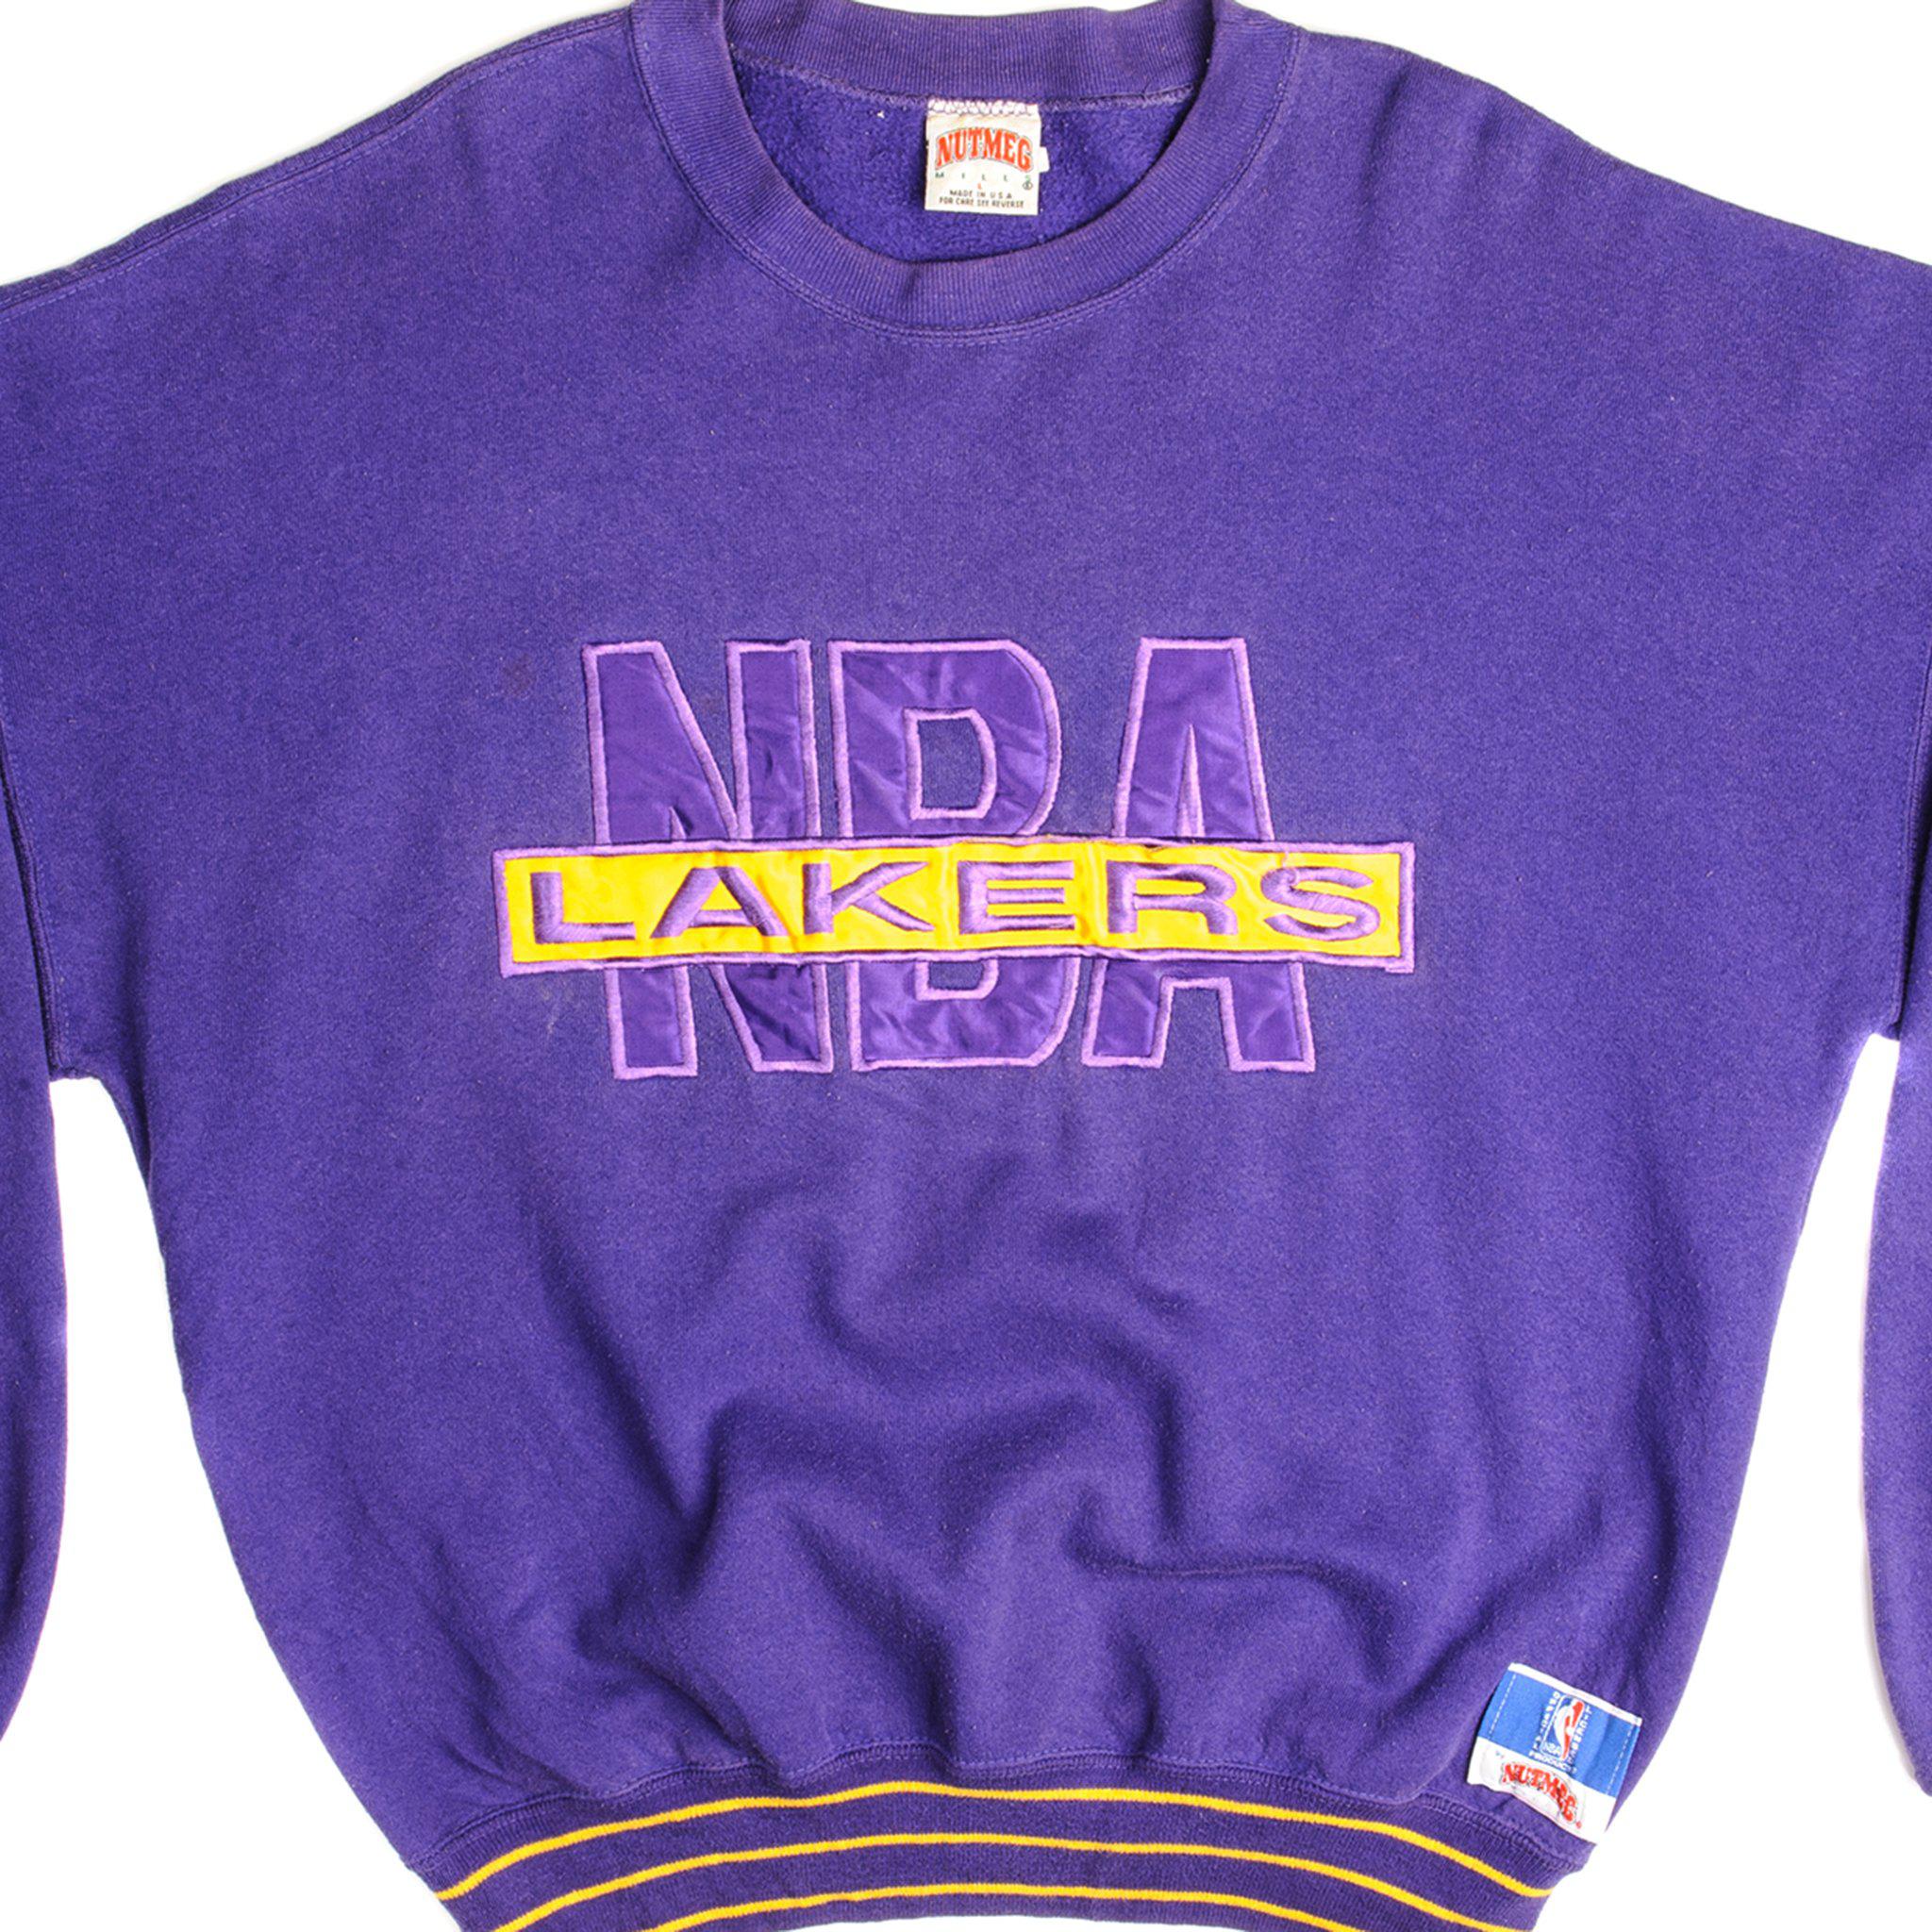 Vintage NBA Los Angeles Lakers Sweatshirt Size XL Made in USA 1980s